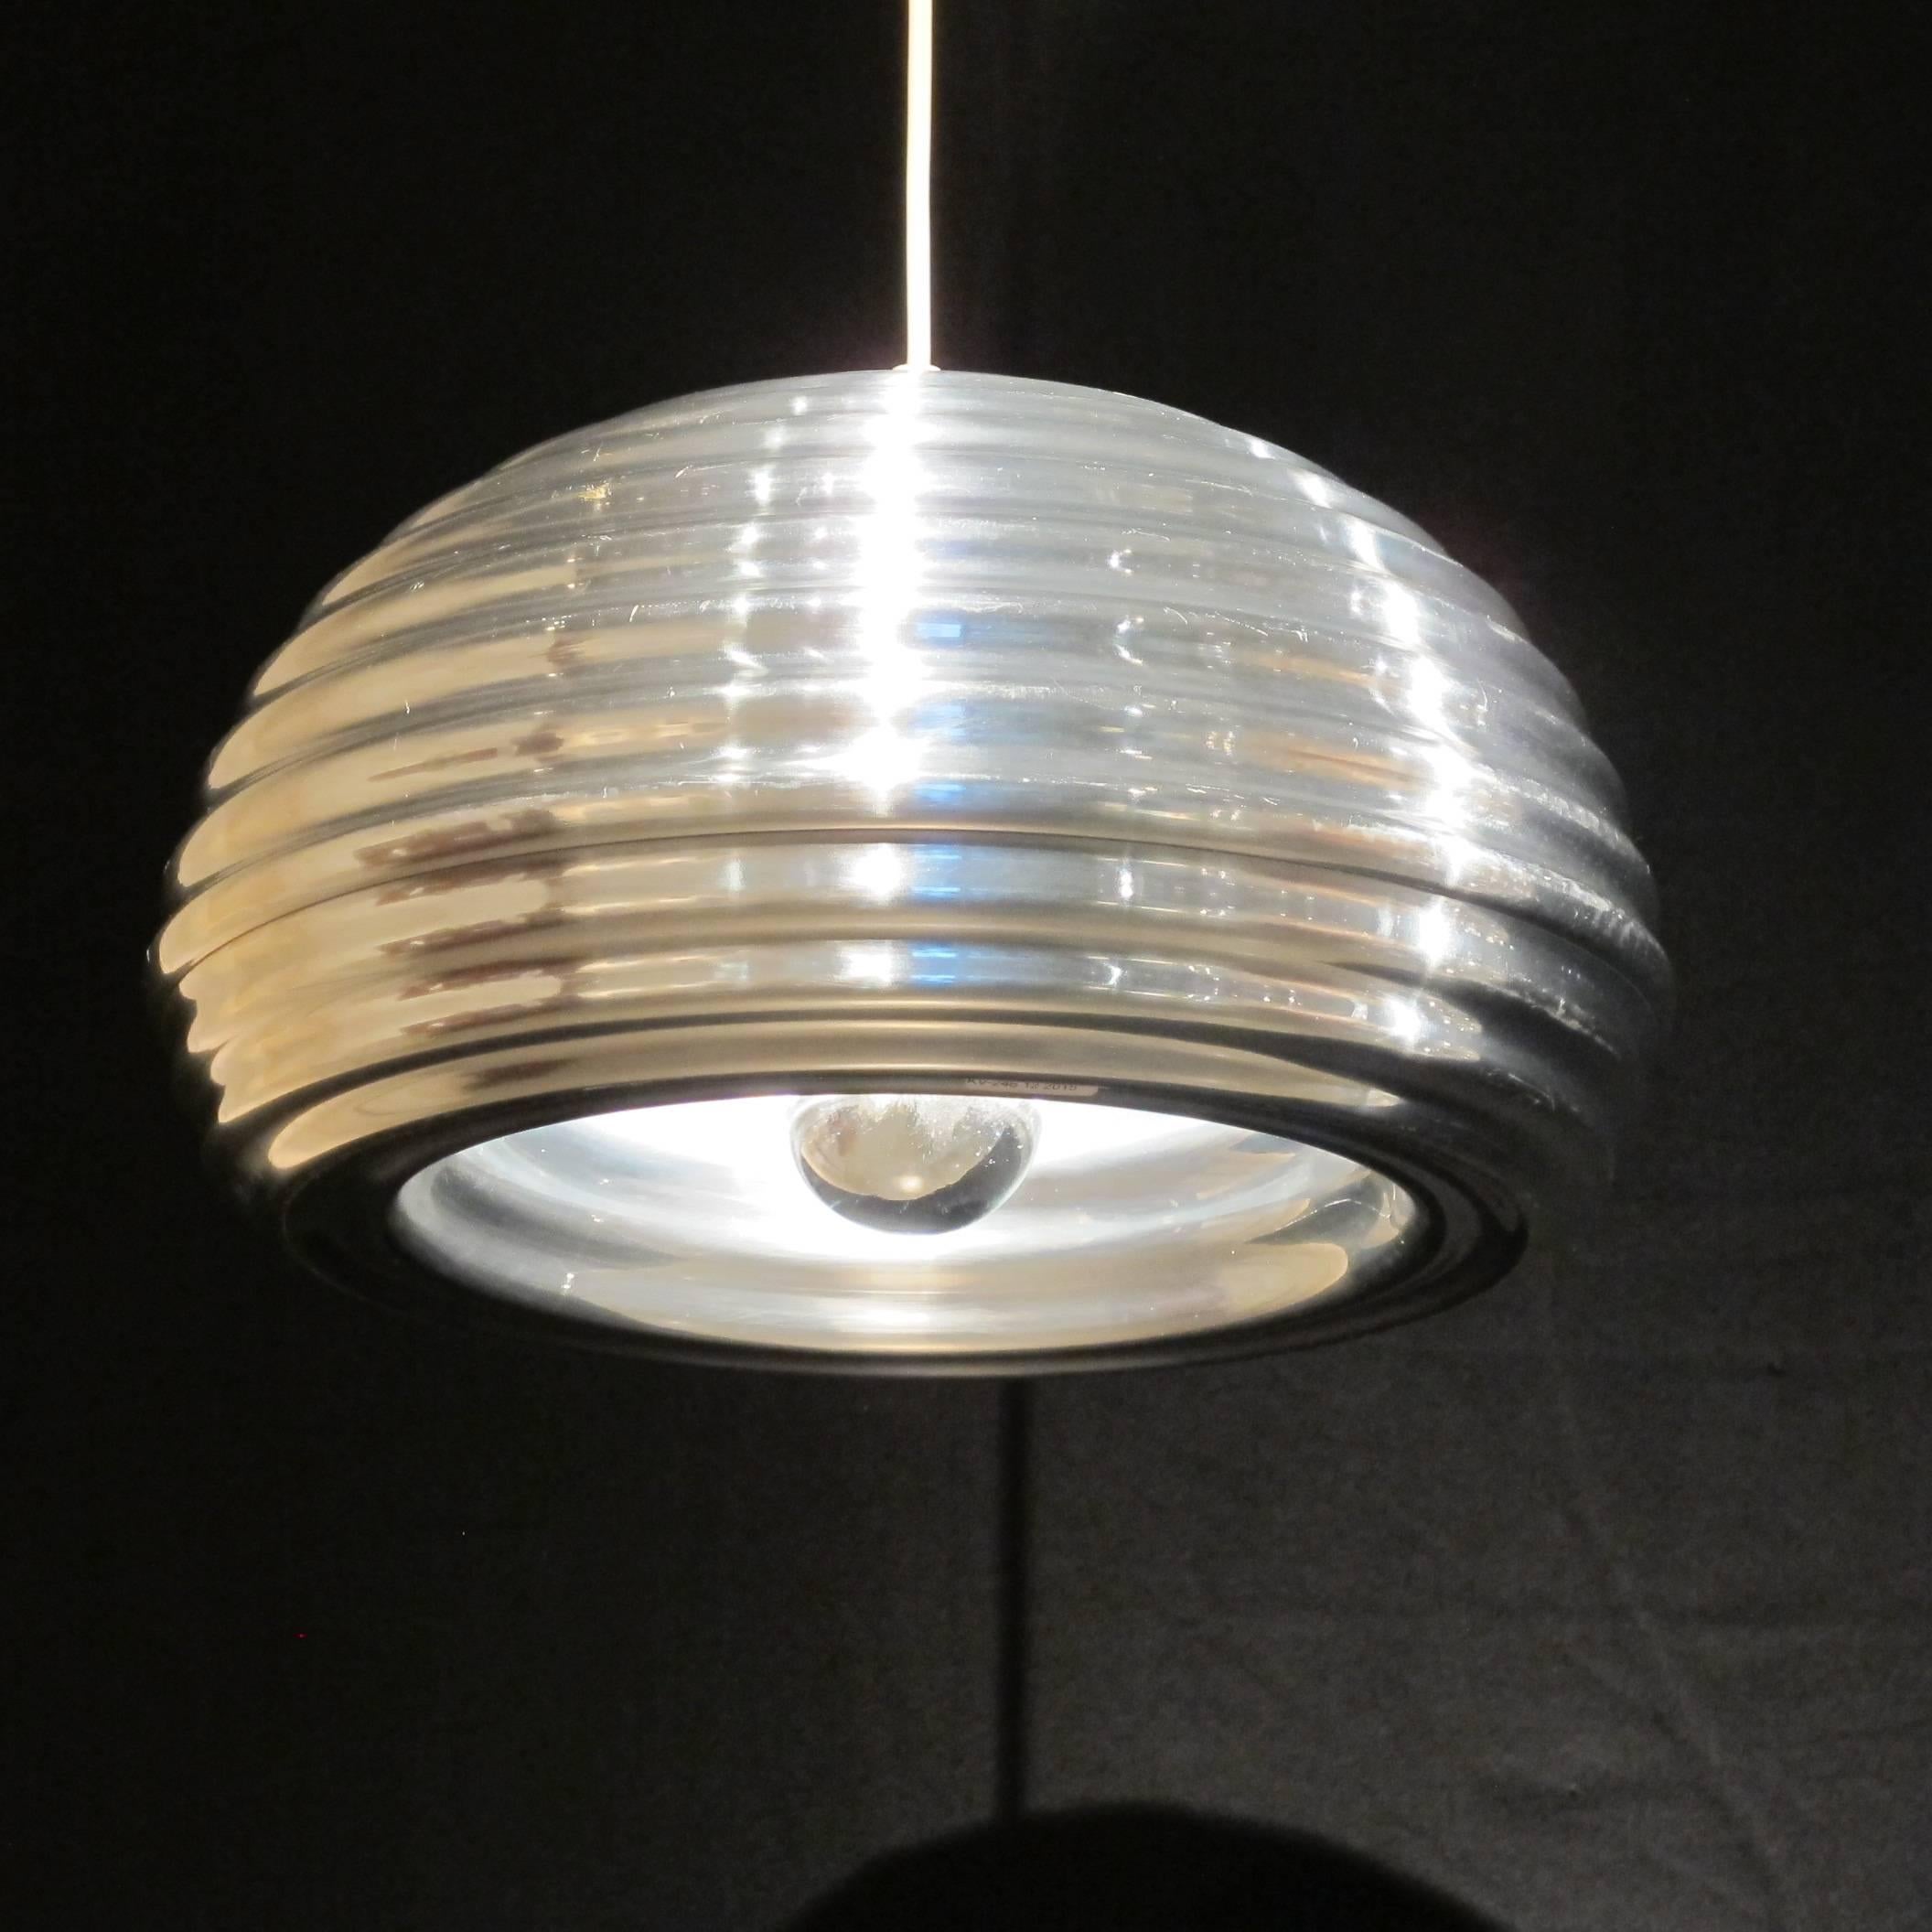 Elegant pendant lamp, designed by Achille and Pier Giacomo Castiglioni for Italian company Flos. This design is from the early 1960s, executed mid-1980s. This design is called Splugen Brau.

In very good vintage condition.

Max. height: 220 cm.